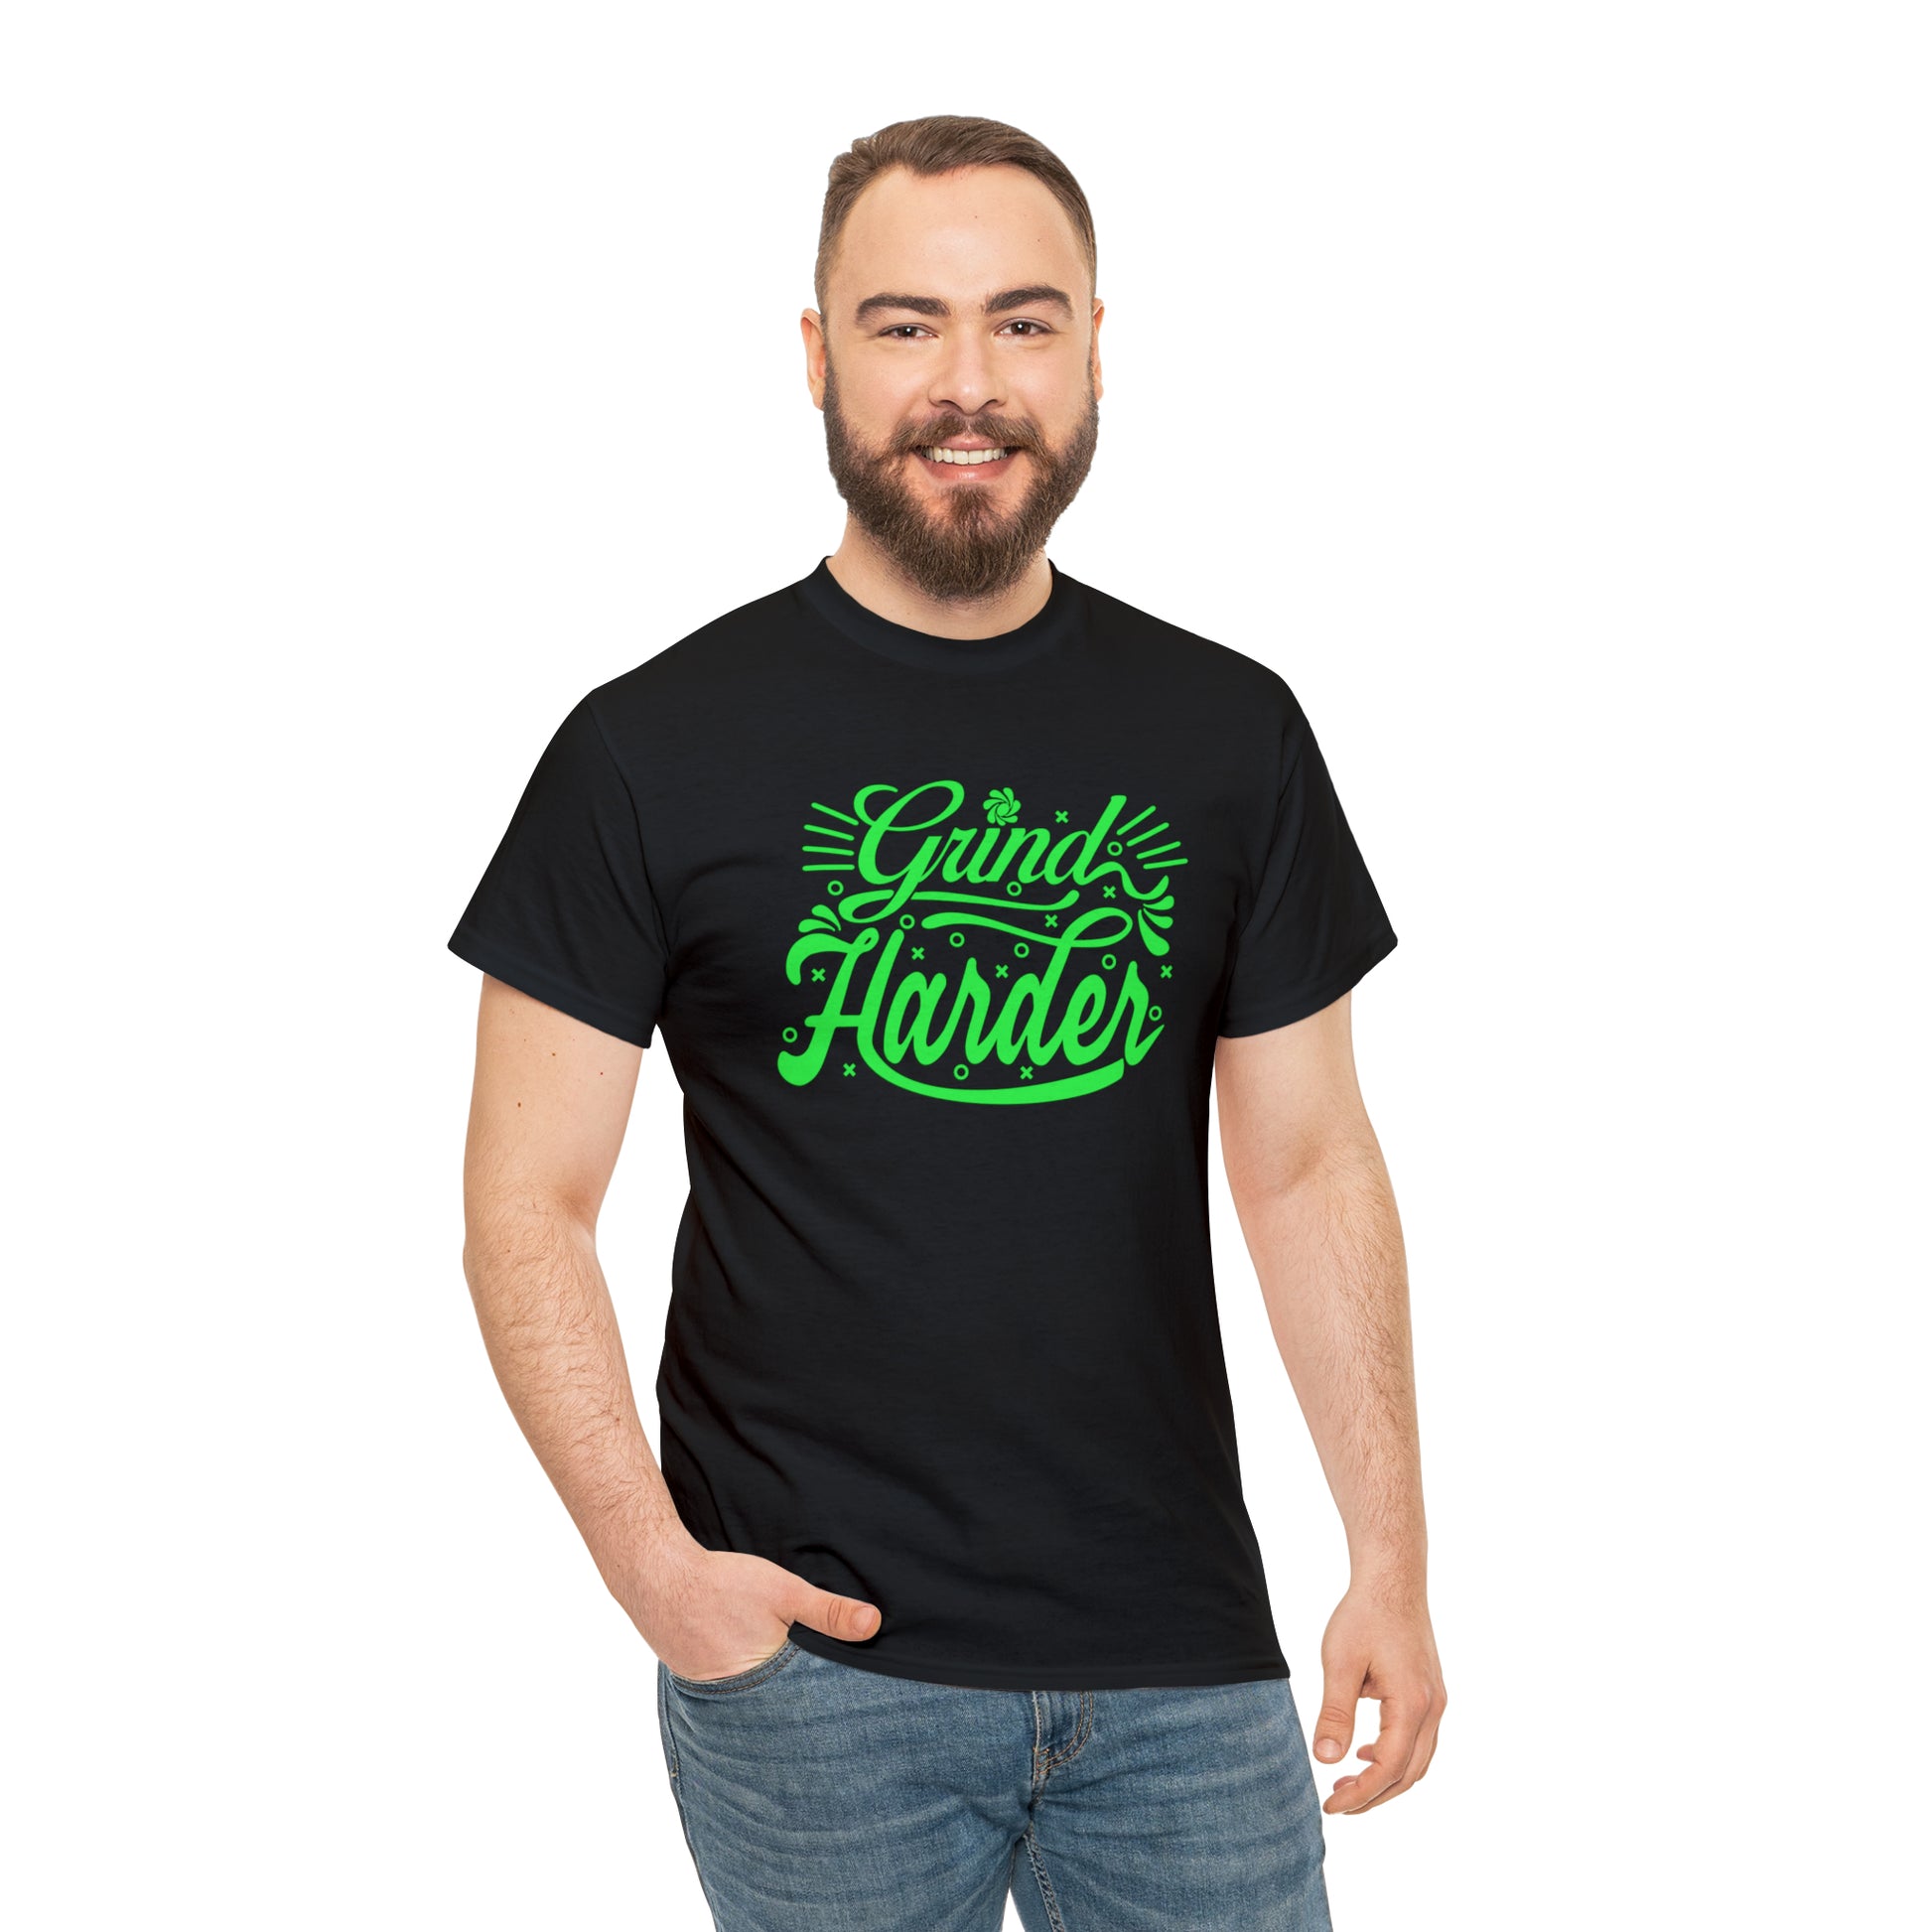 "Grind Harder" T-Shirt - Weave Got Gifts - Unique Gifts You Won’t Find Anywhere Else!